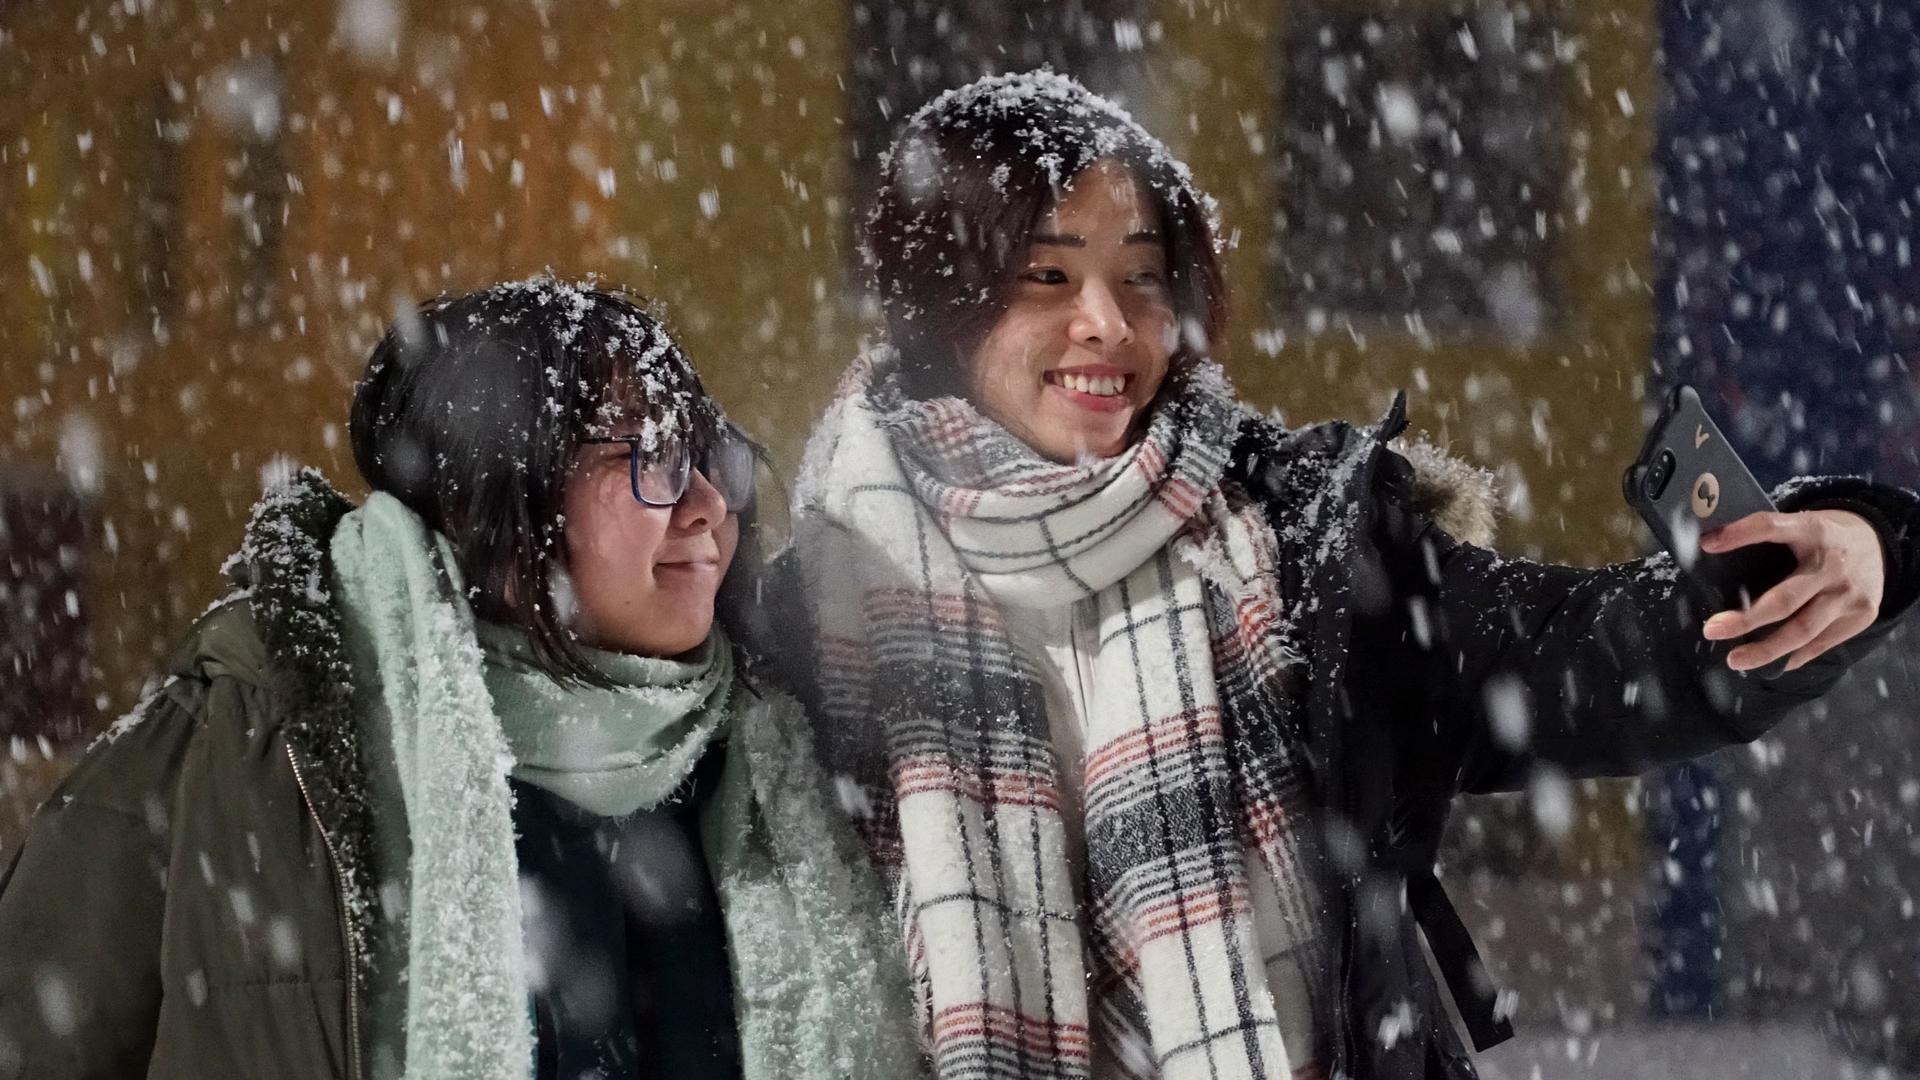 Tourists from China take a selfie as large snow flakes are falling all around them.